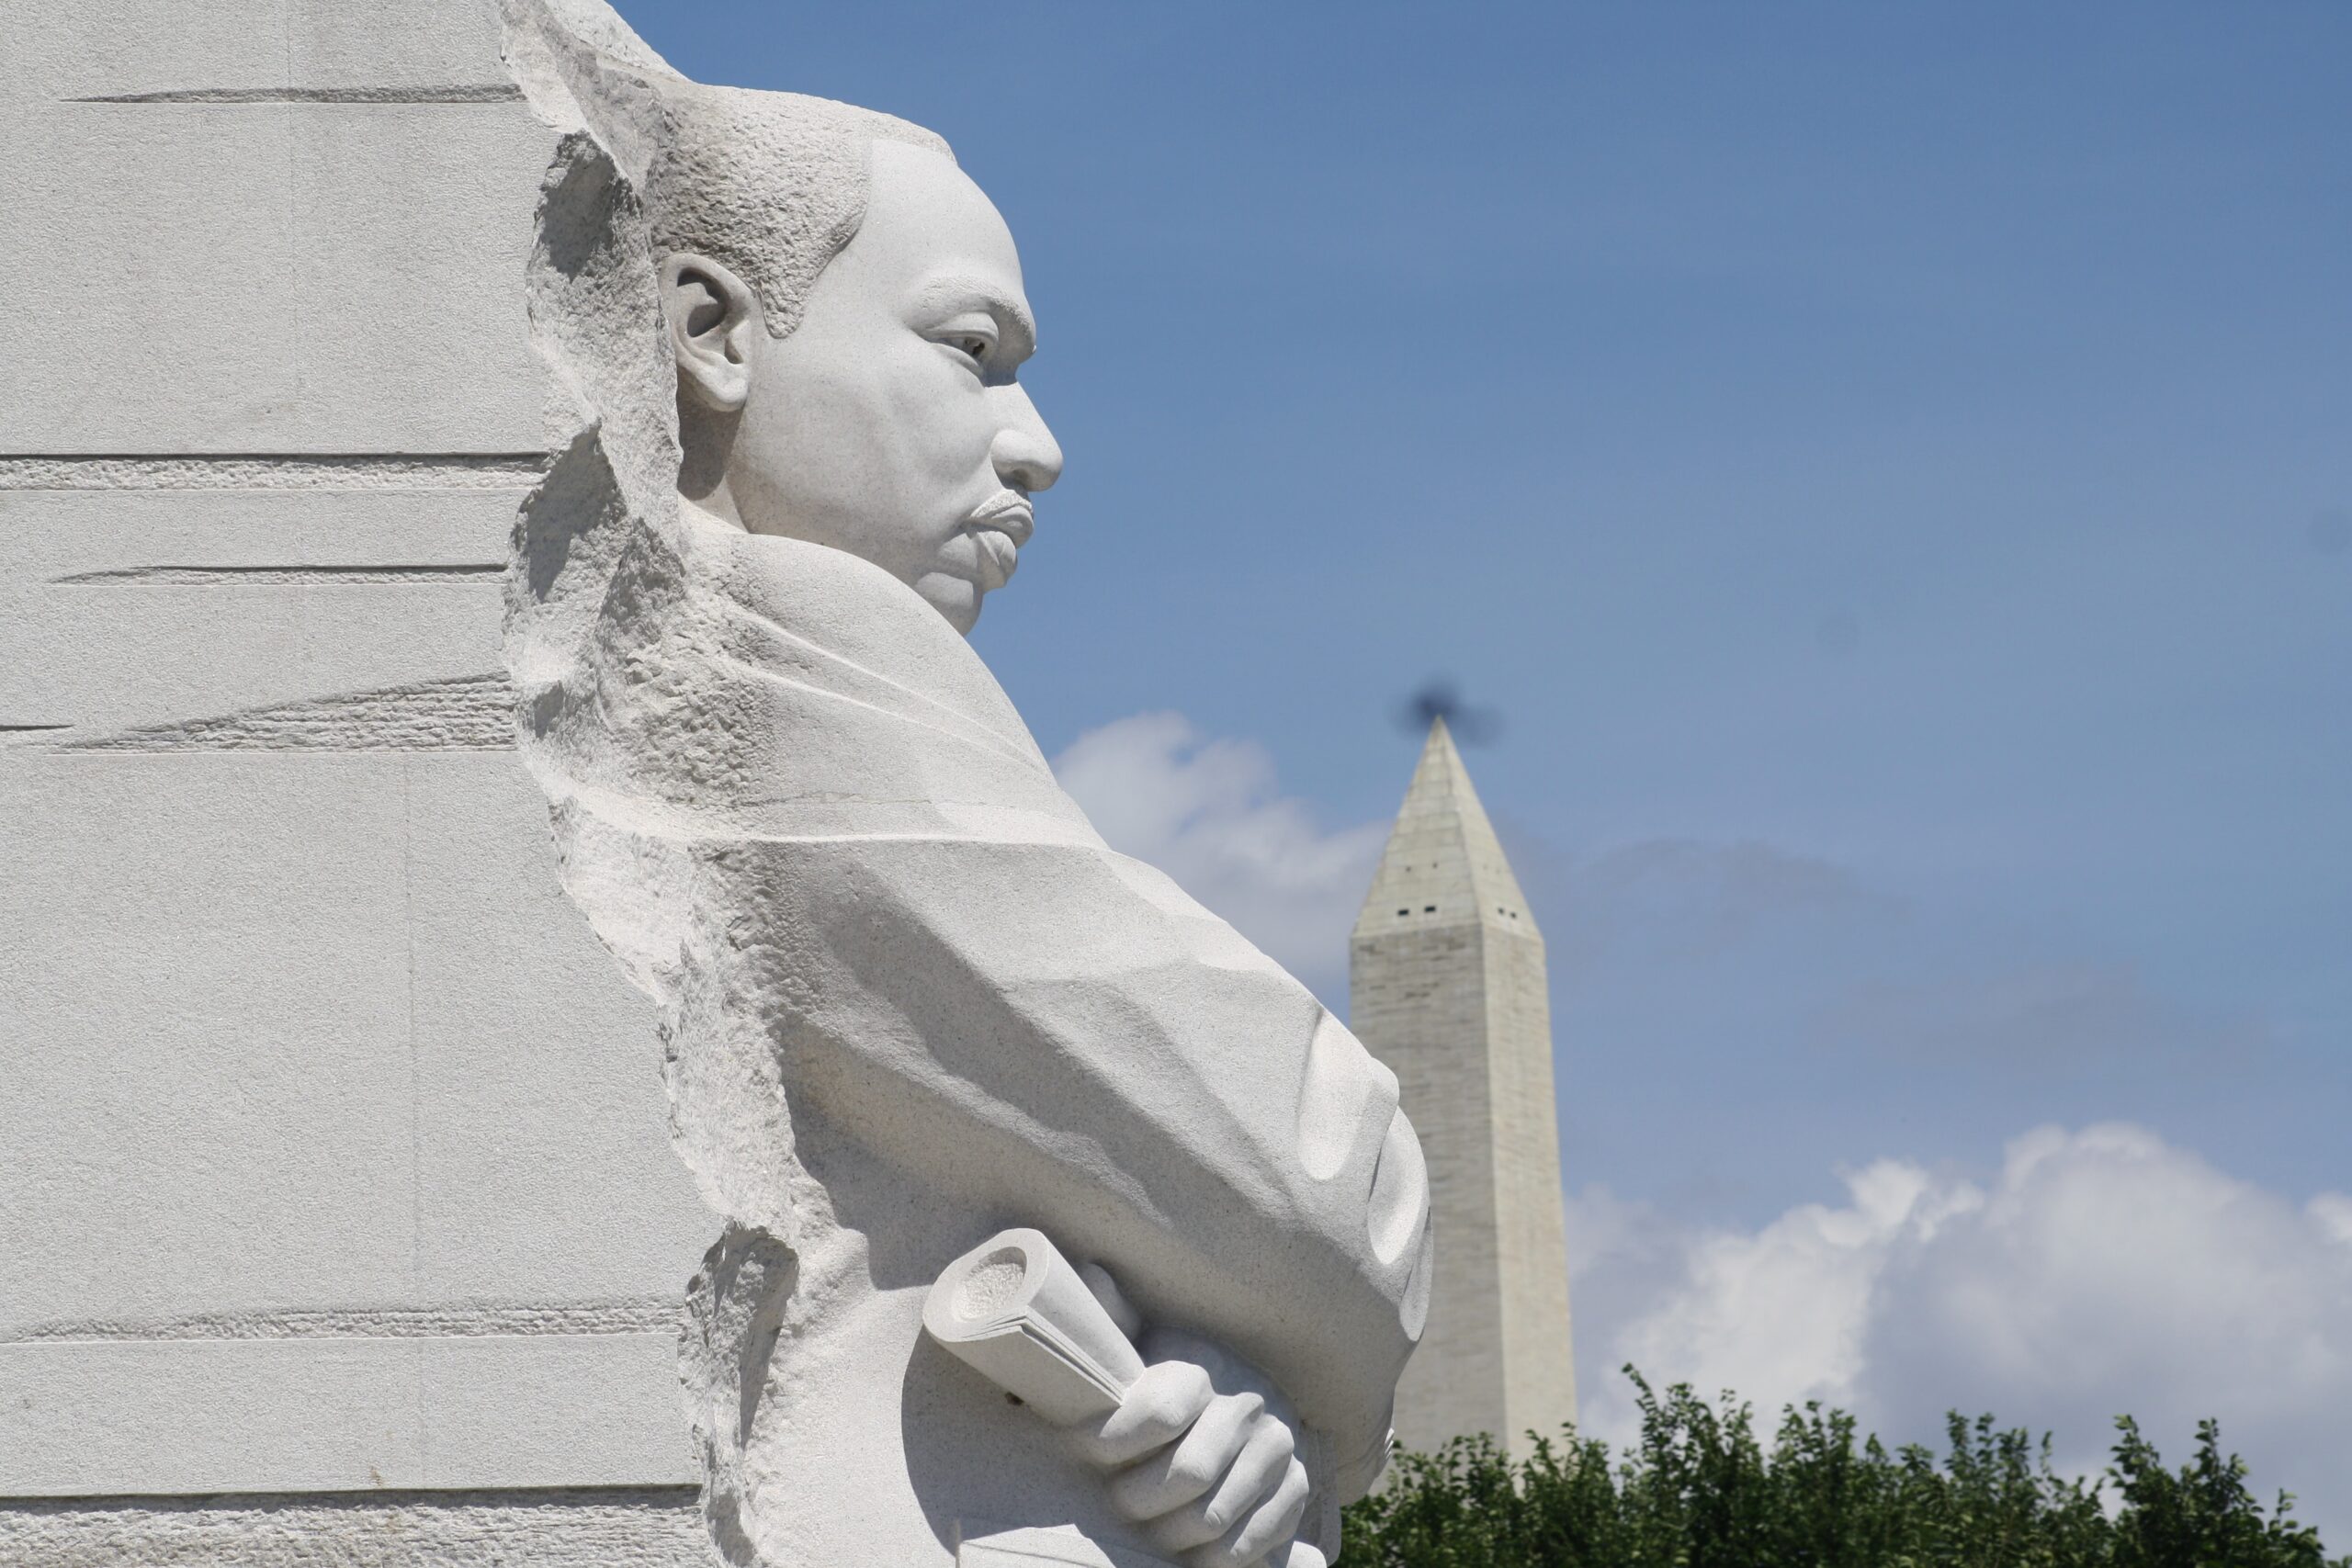 The International Civil Rights museum has many educational and archival objects available for viewing. 
pictured: Martin Luther King Jr. stone memorial 